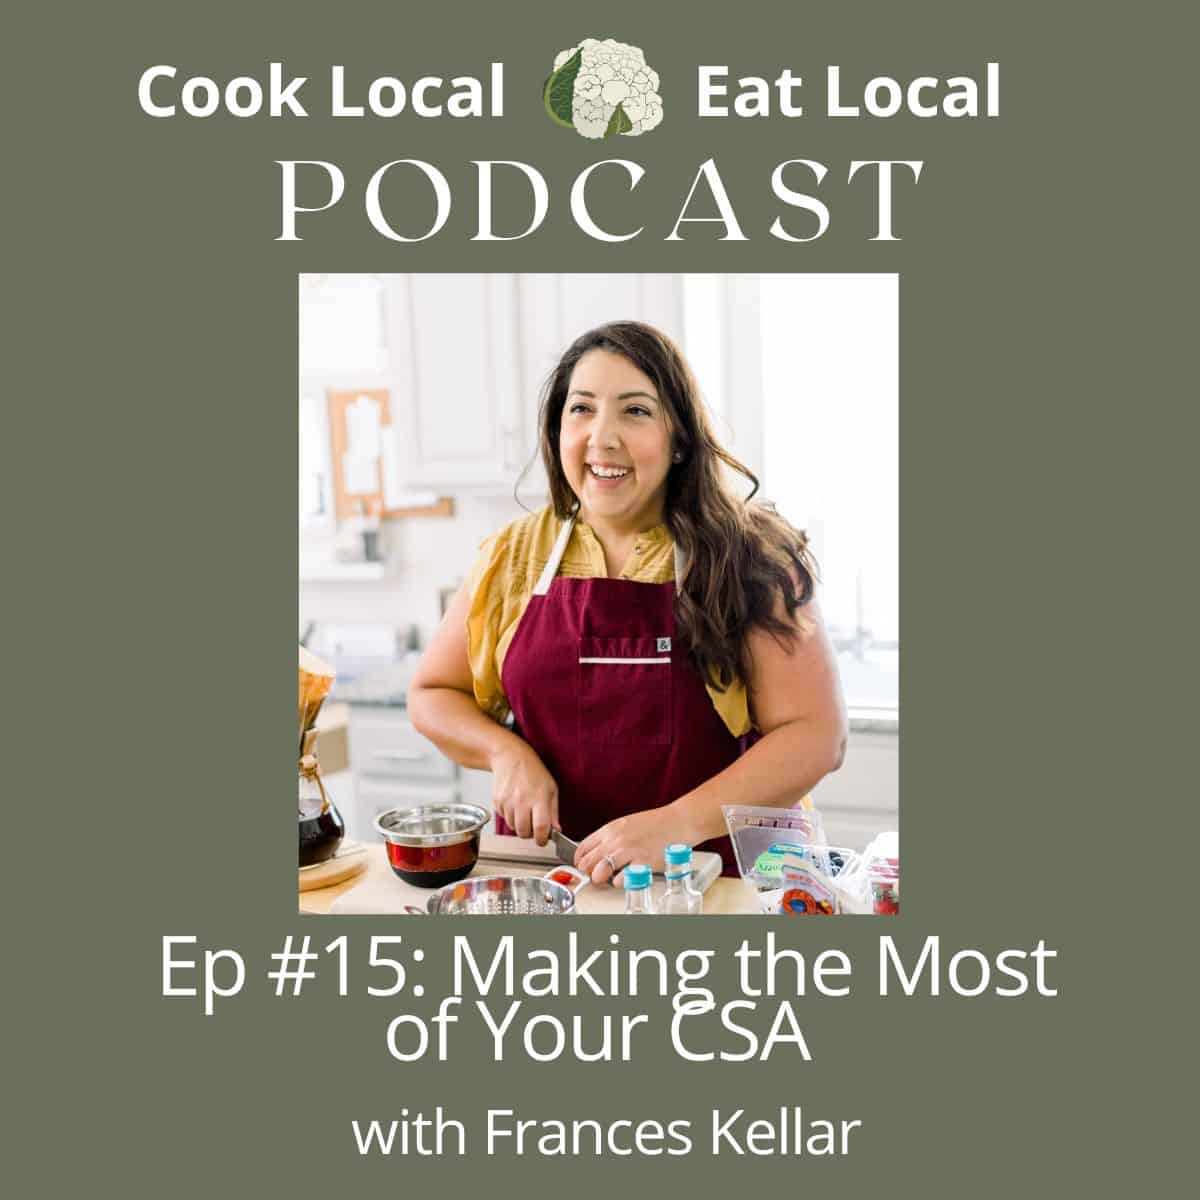 podcast cover image for Cook Local Eat Local episode with Frances Kellar. Shows a photo of Frances and text about the episode, which is about "Making the most of your CSA".